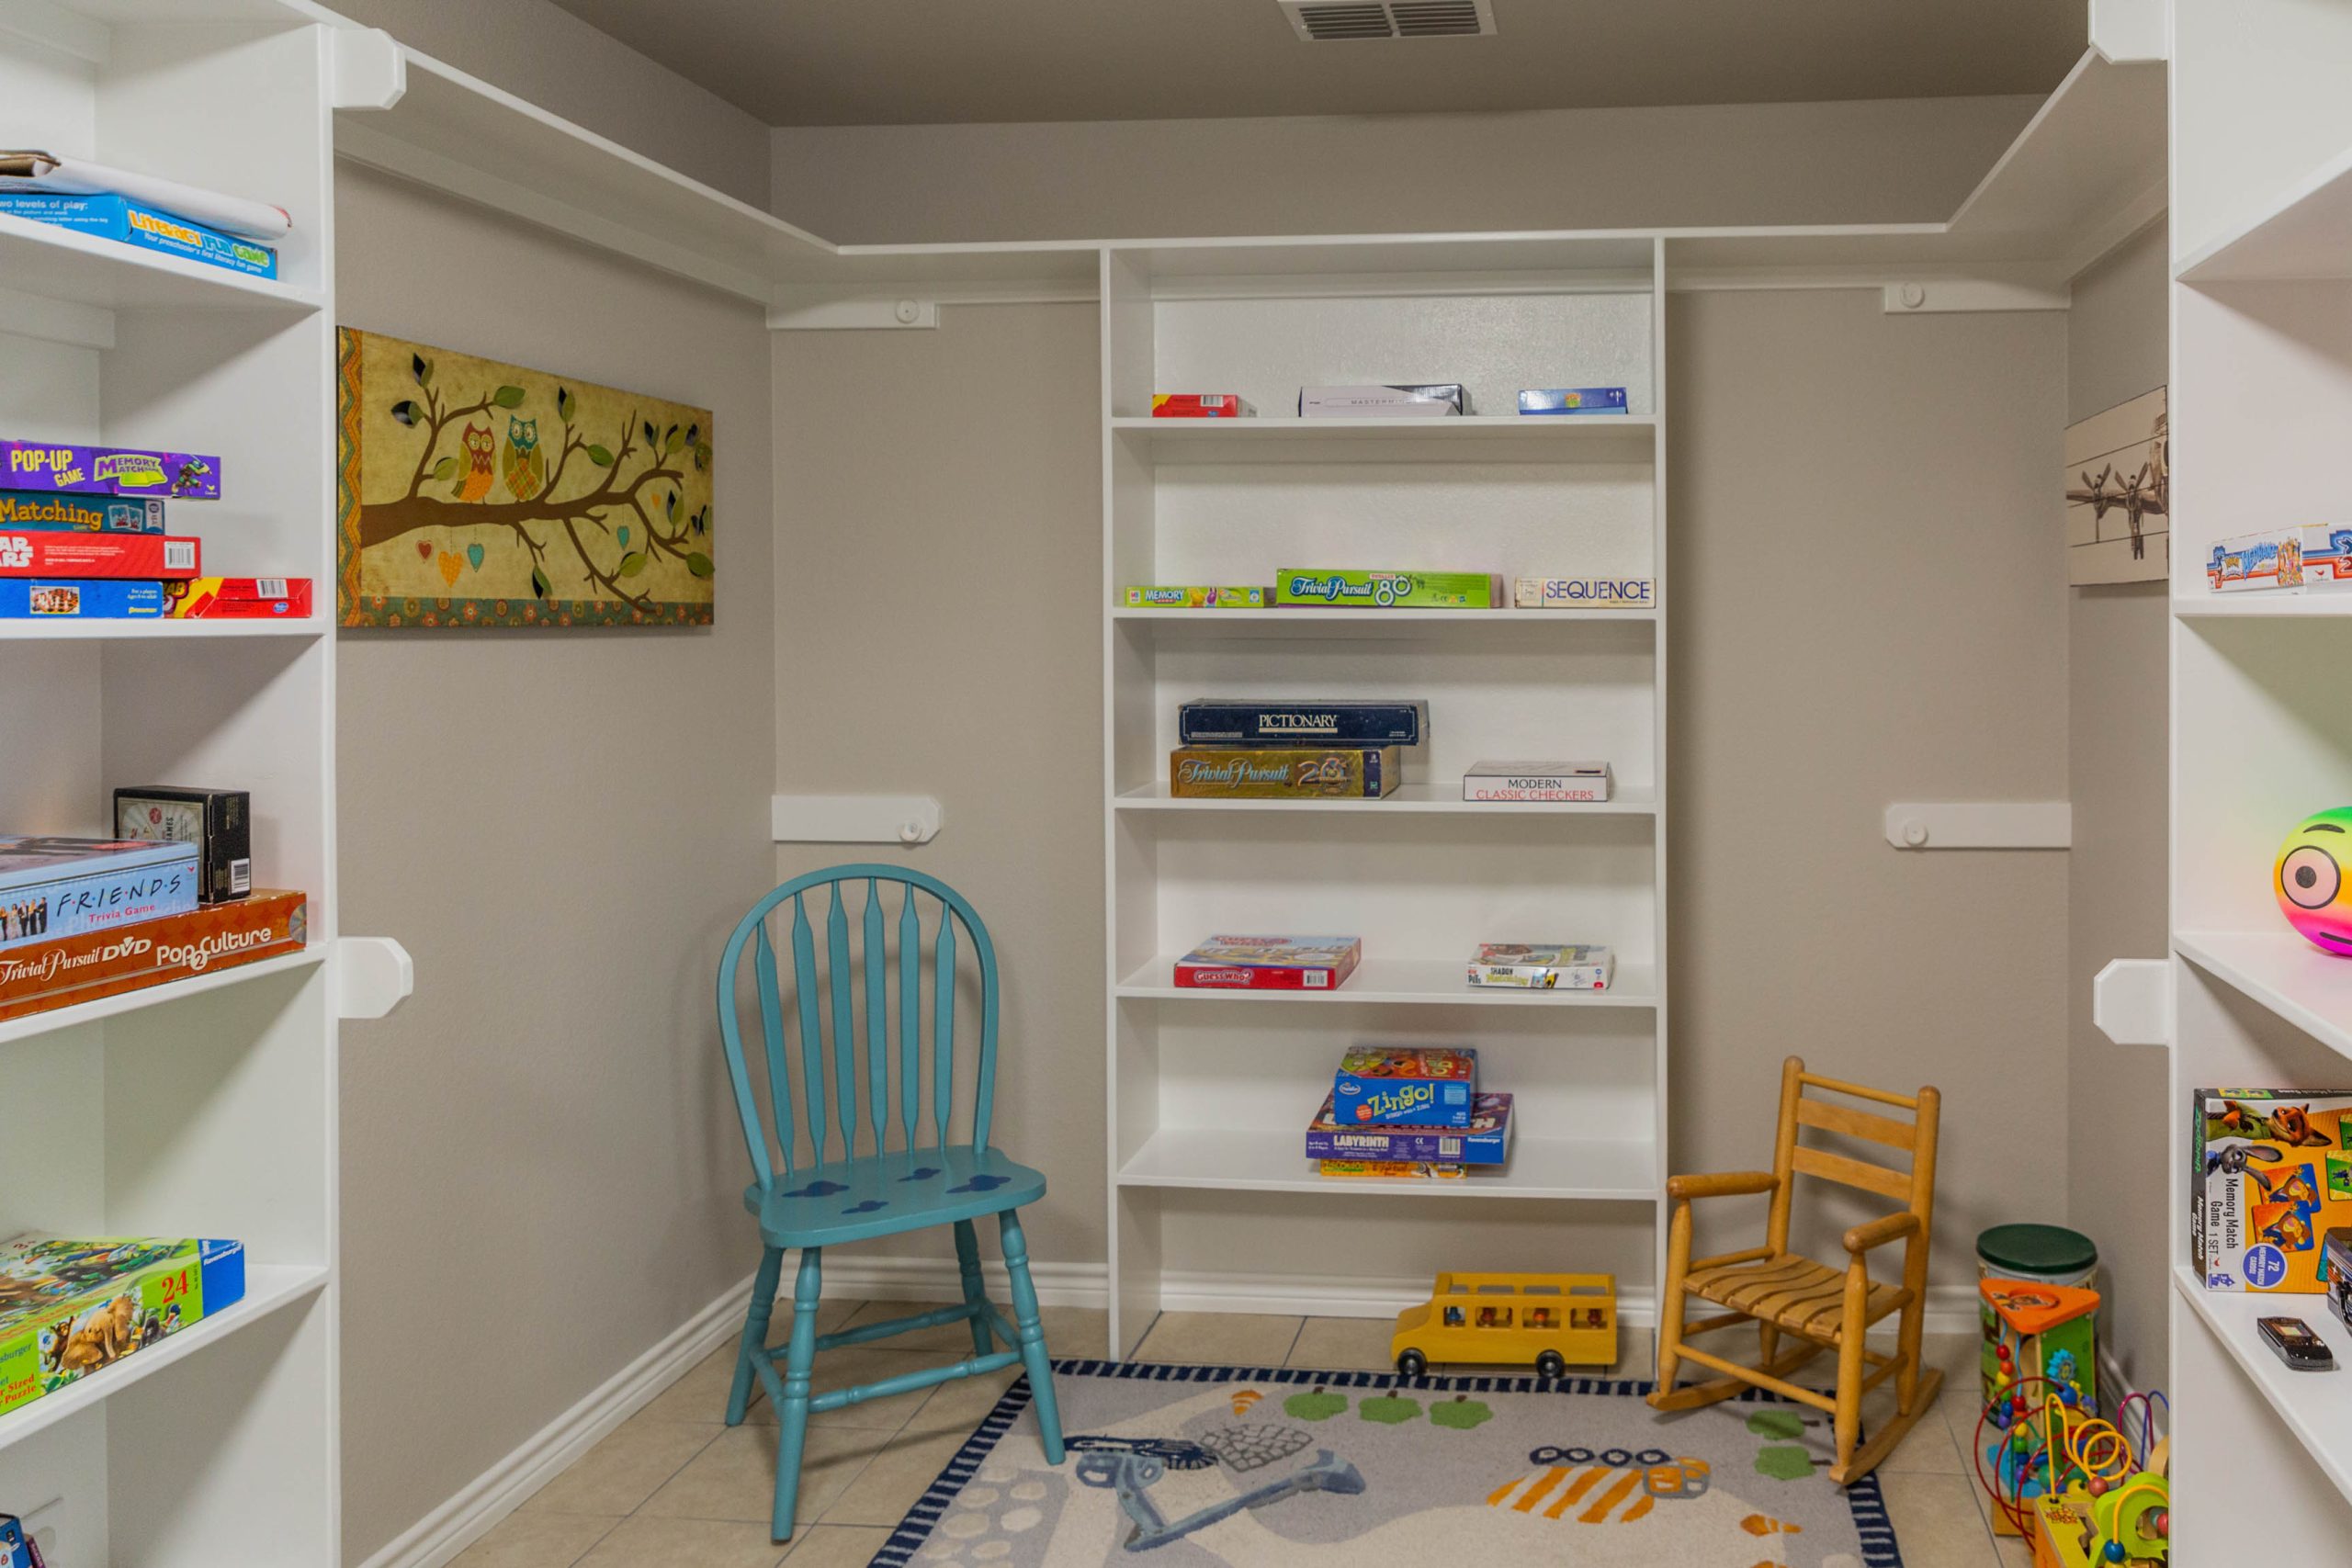 airbnb images of a designated kids area